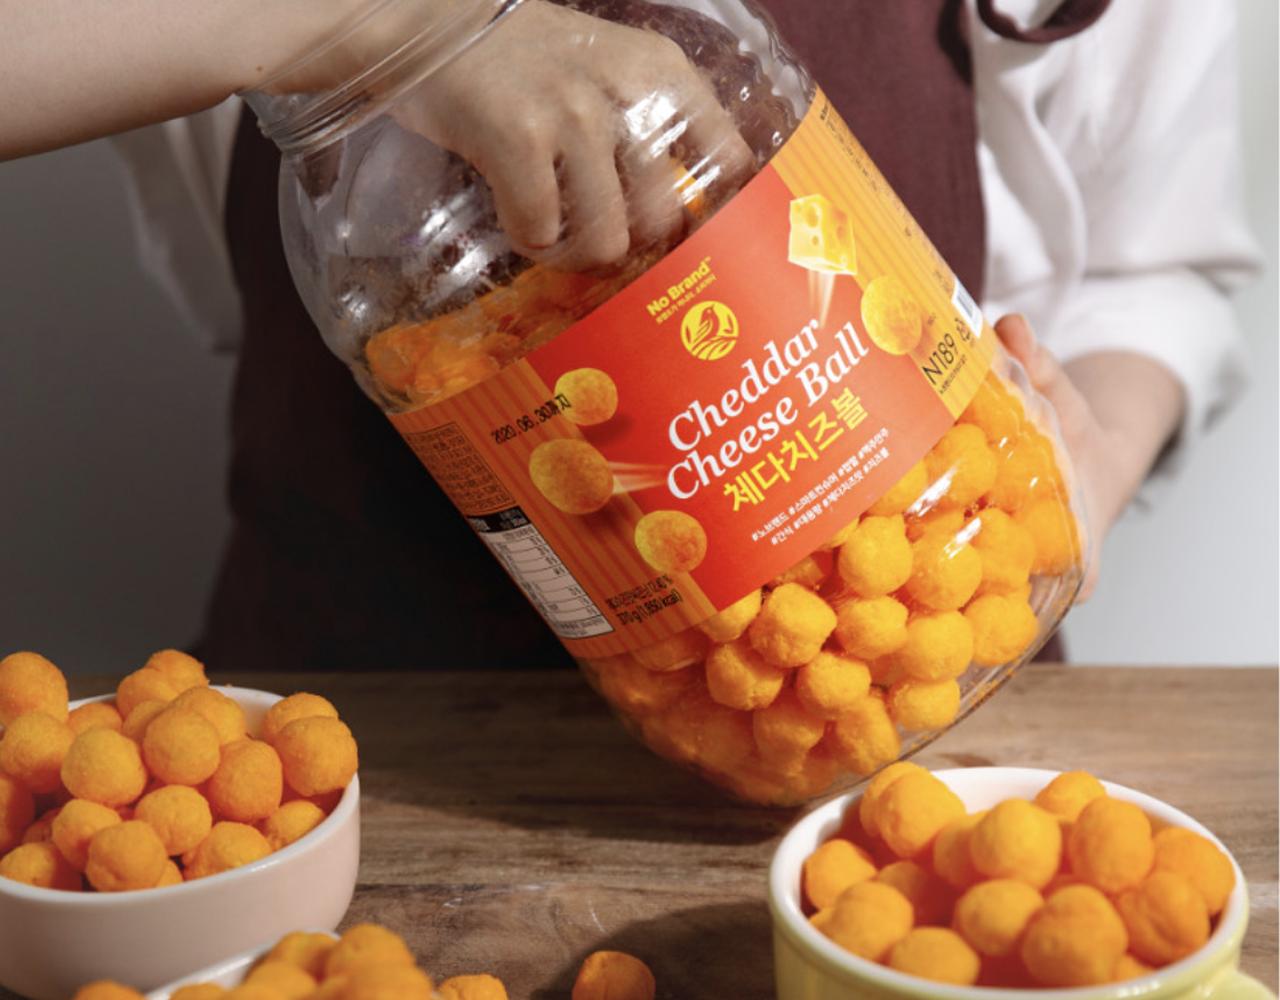 open jar, and bowls full of korean brand no brand's cheddar cheese ball snack